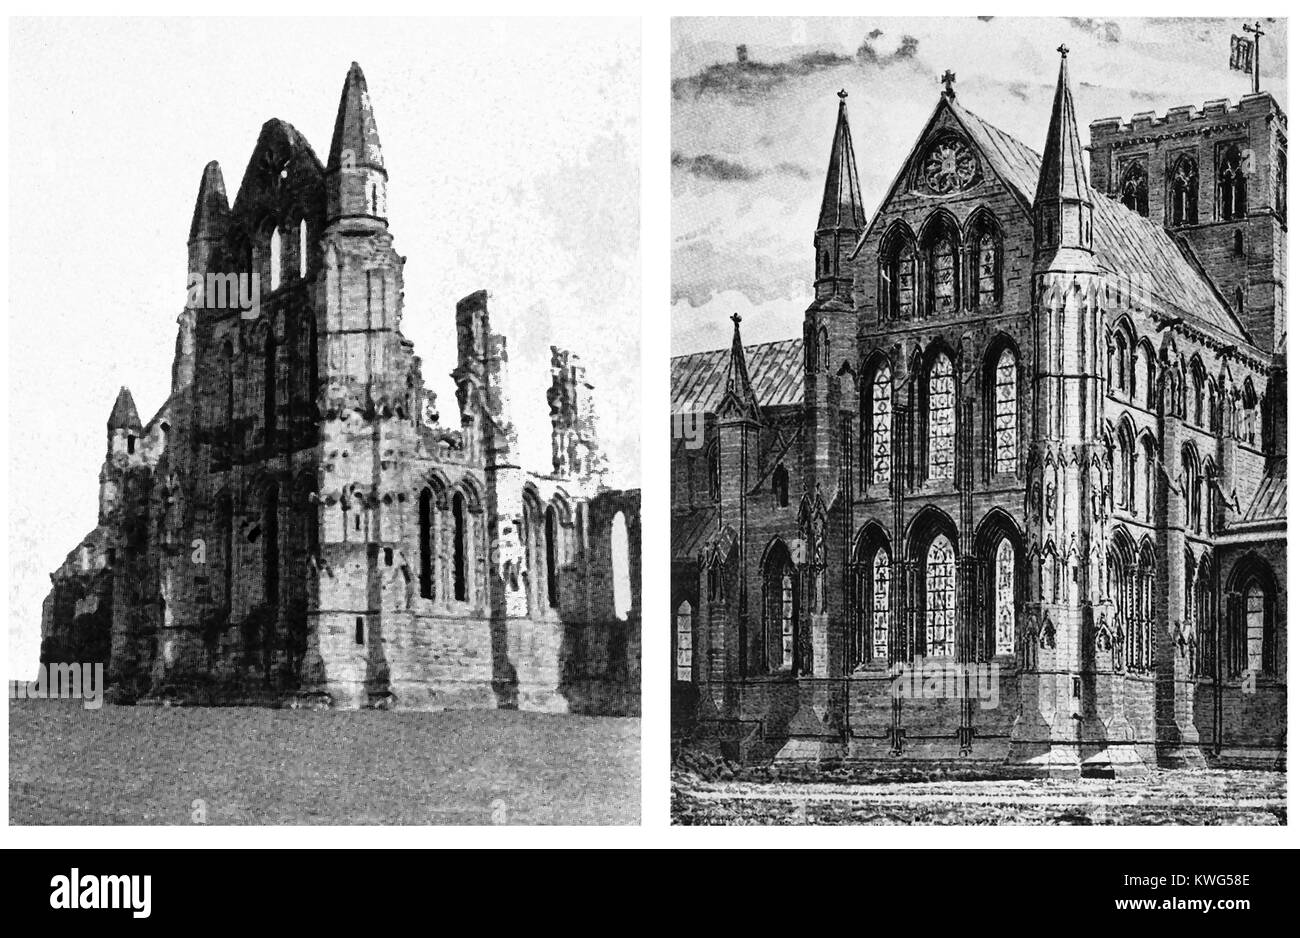 WHITBY ABBEY RESTORED , North Yorkshire UK - The North Transept (exterior)in ruins and an artists impression of its original form (1938 illustrations) Stock Photo